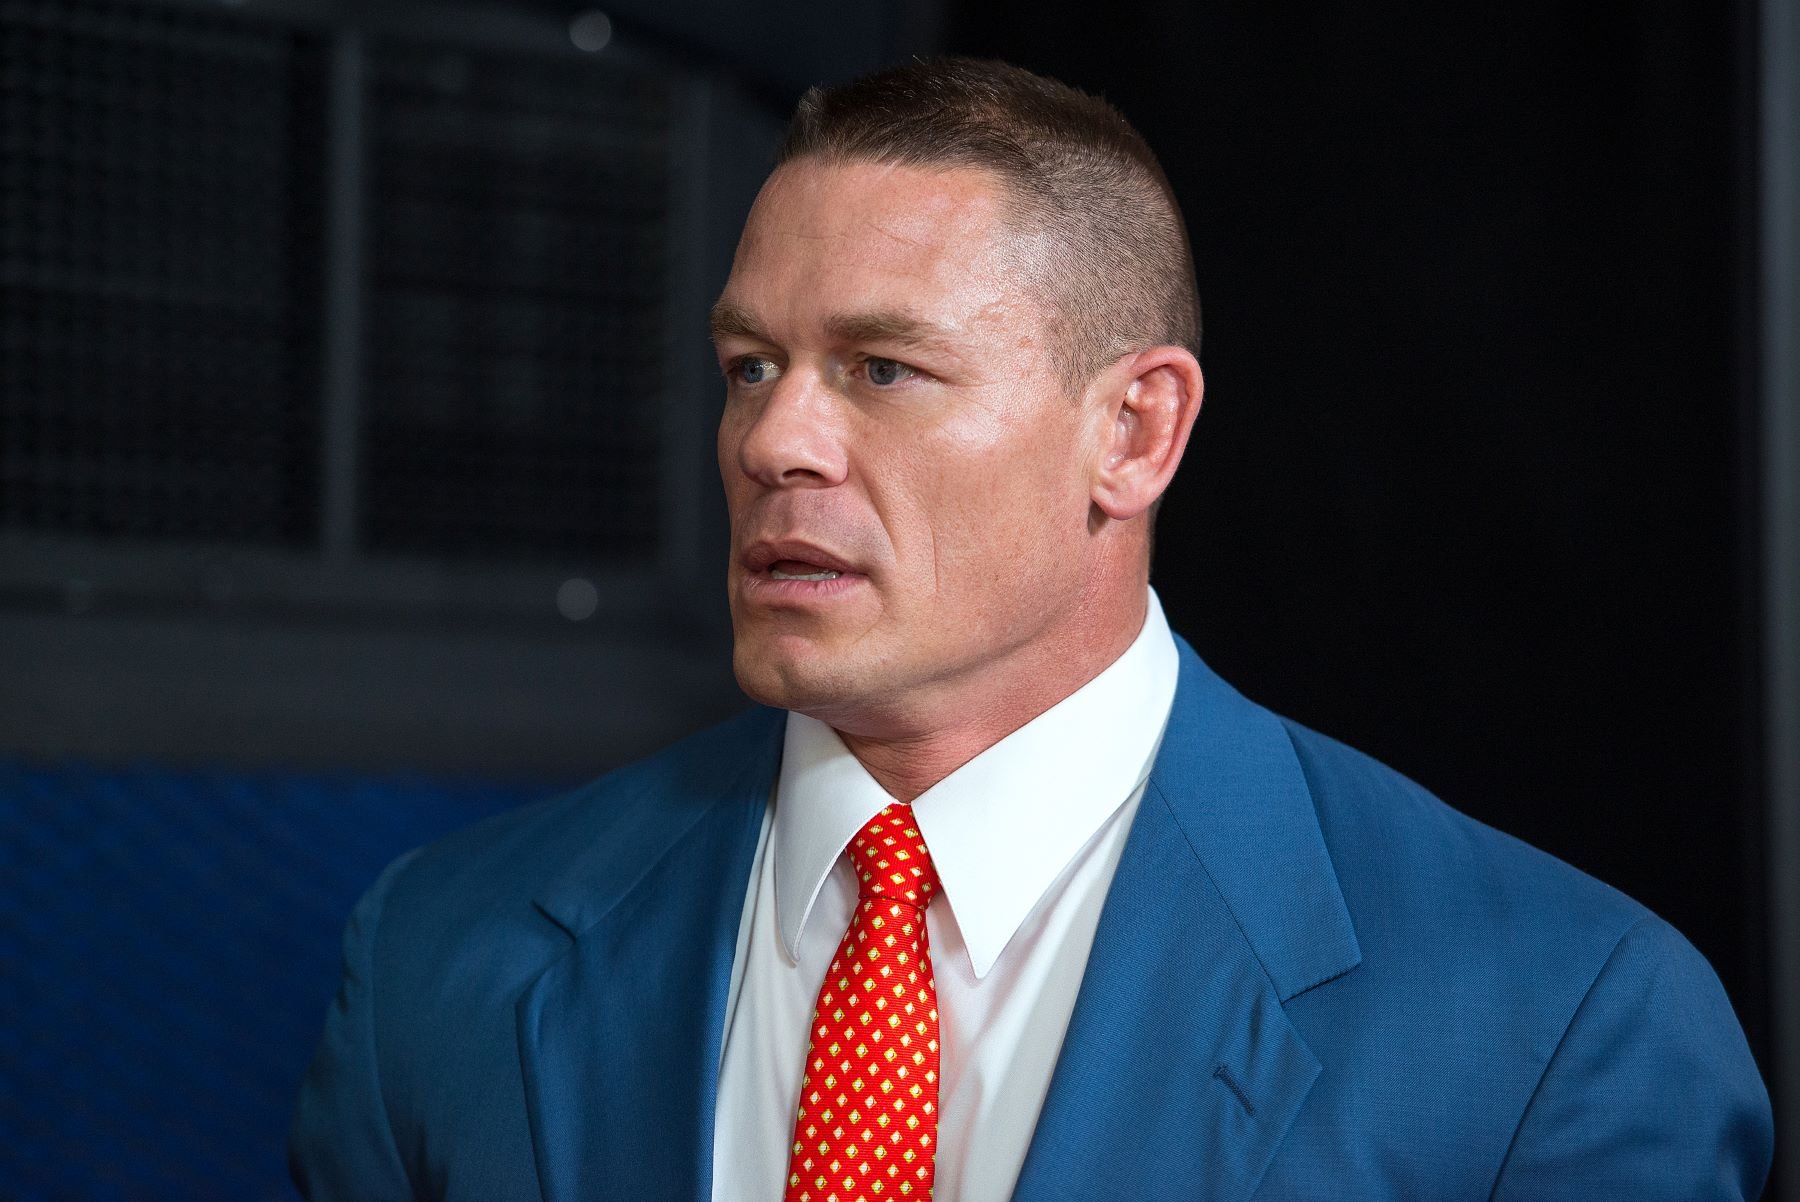 John Cena at the 'Trainwreck' New York premiere at Alice Tully Hall